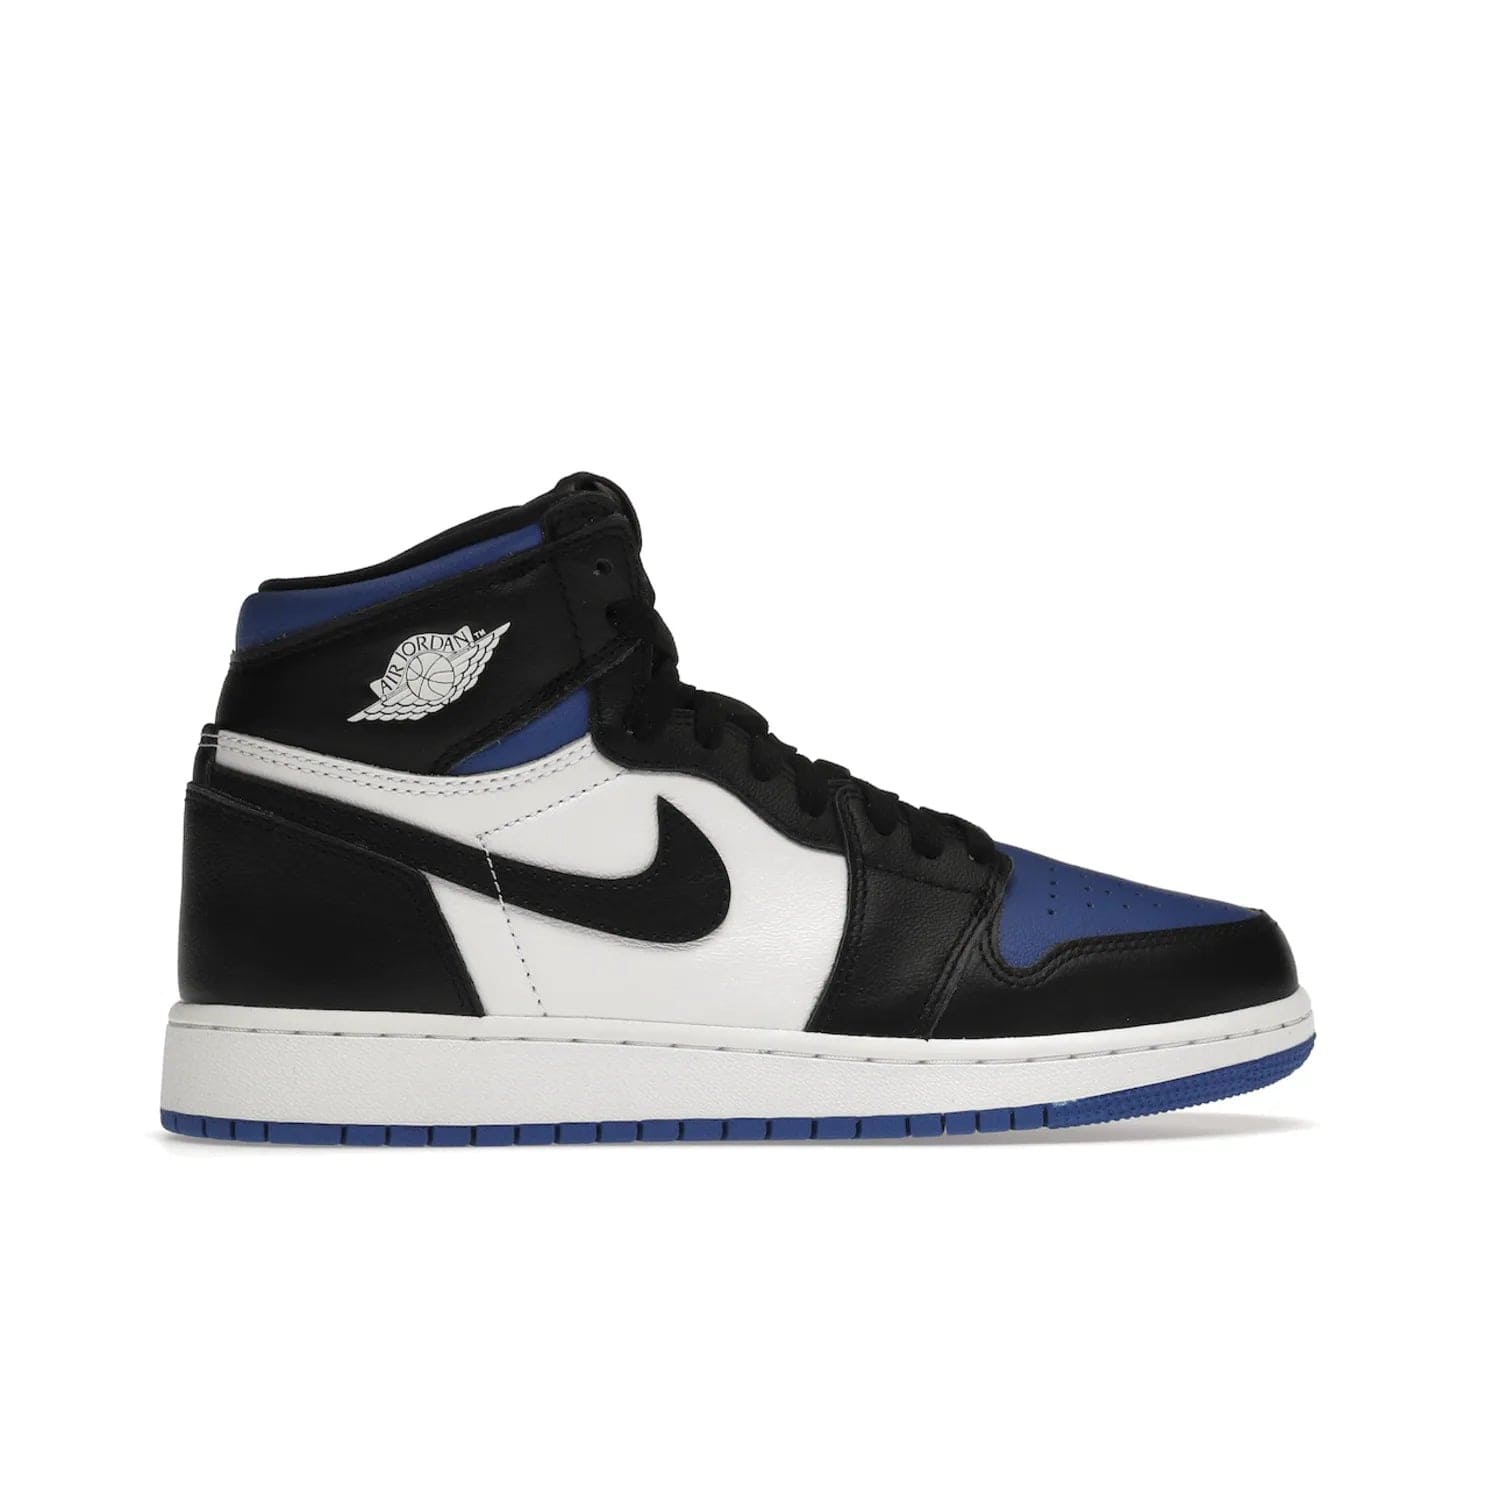 Jordan 1 Retro High Royal Toe (GS) - Image 36 - Only at www.BallersClubKickz.com - Take your sneaker wardrobe to the next level with the Jordan 1 Retro High Royal Toe (GS). Combining classic design with a luxurious white and royal blue leather upper, a textured black Swoosh and a tapered outsole. Stand out with the Air Jordan Wings logo near the heel.